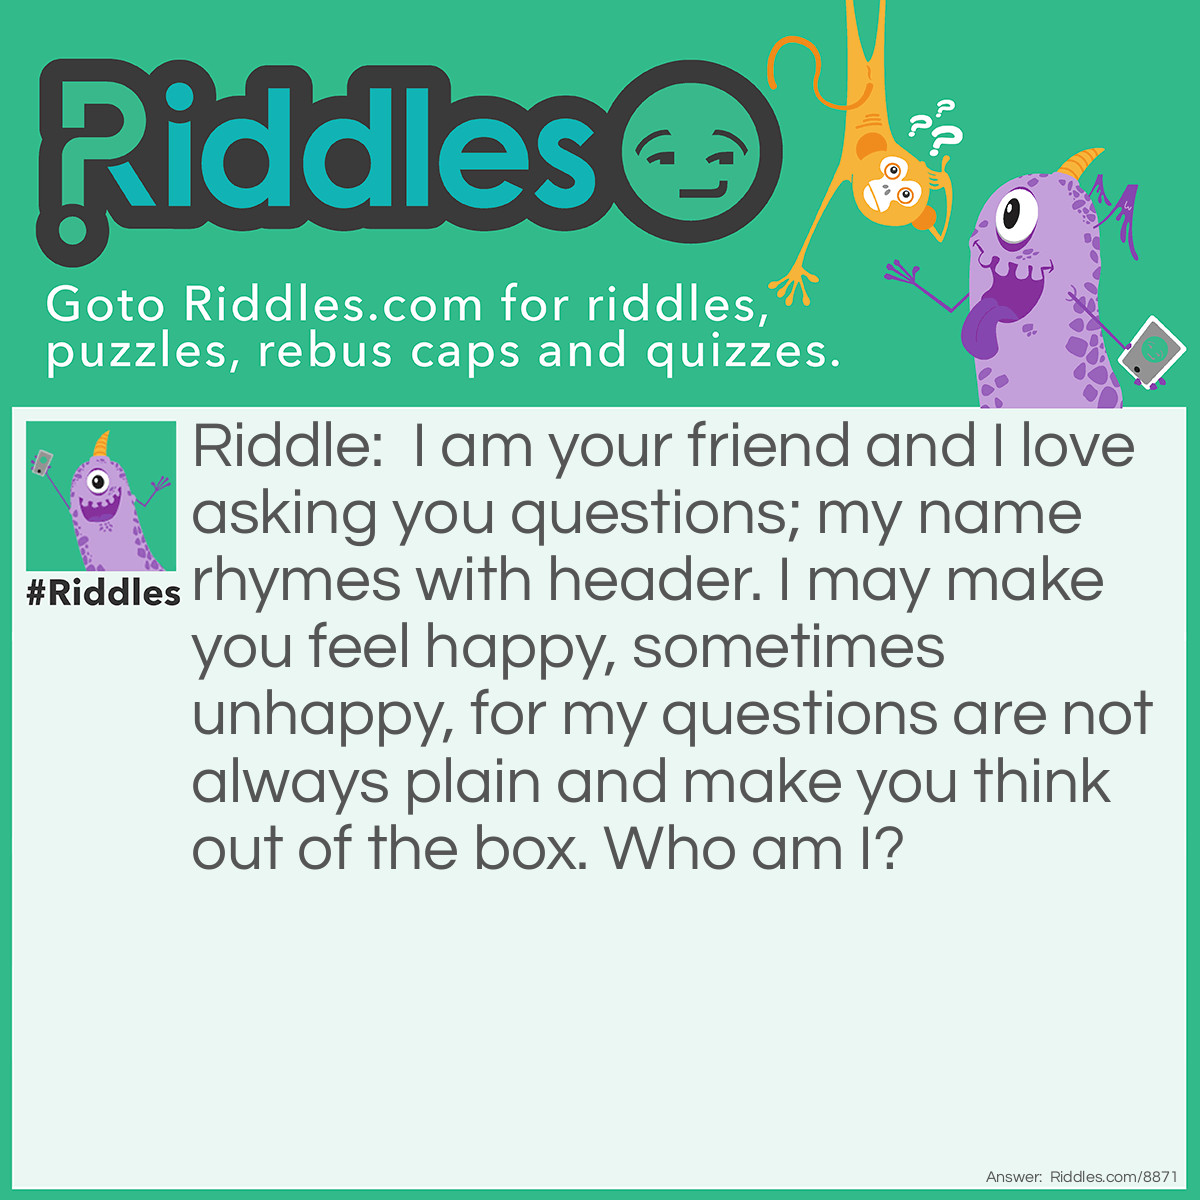 Riddle: I am your friend and I love asking you questions; my name rhymes with header. I may make you feel happy, sometimes unhappy, for my questions are not always plain and make you think out of the box. Who am I? Answer: A Riddler